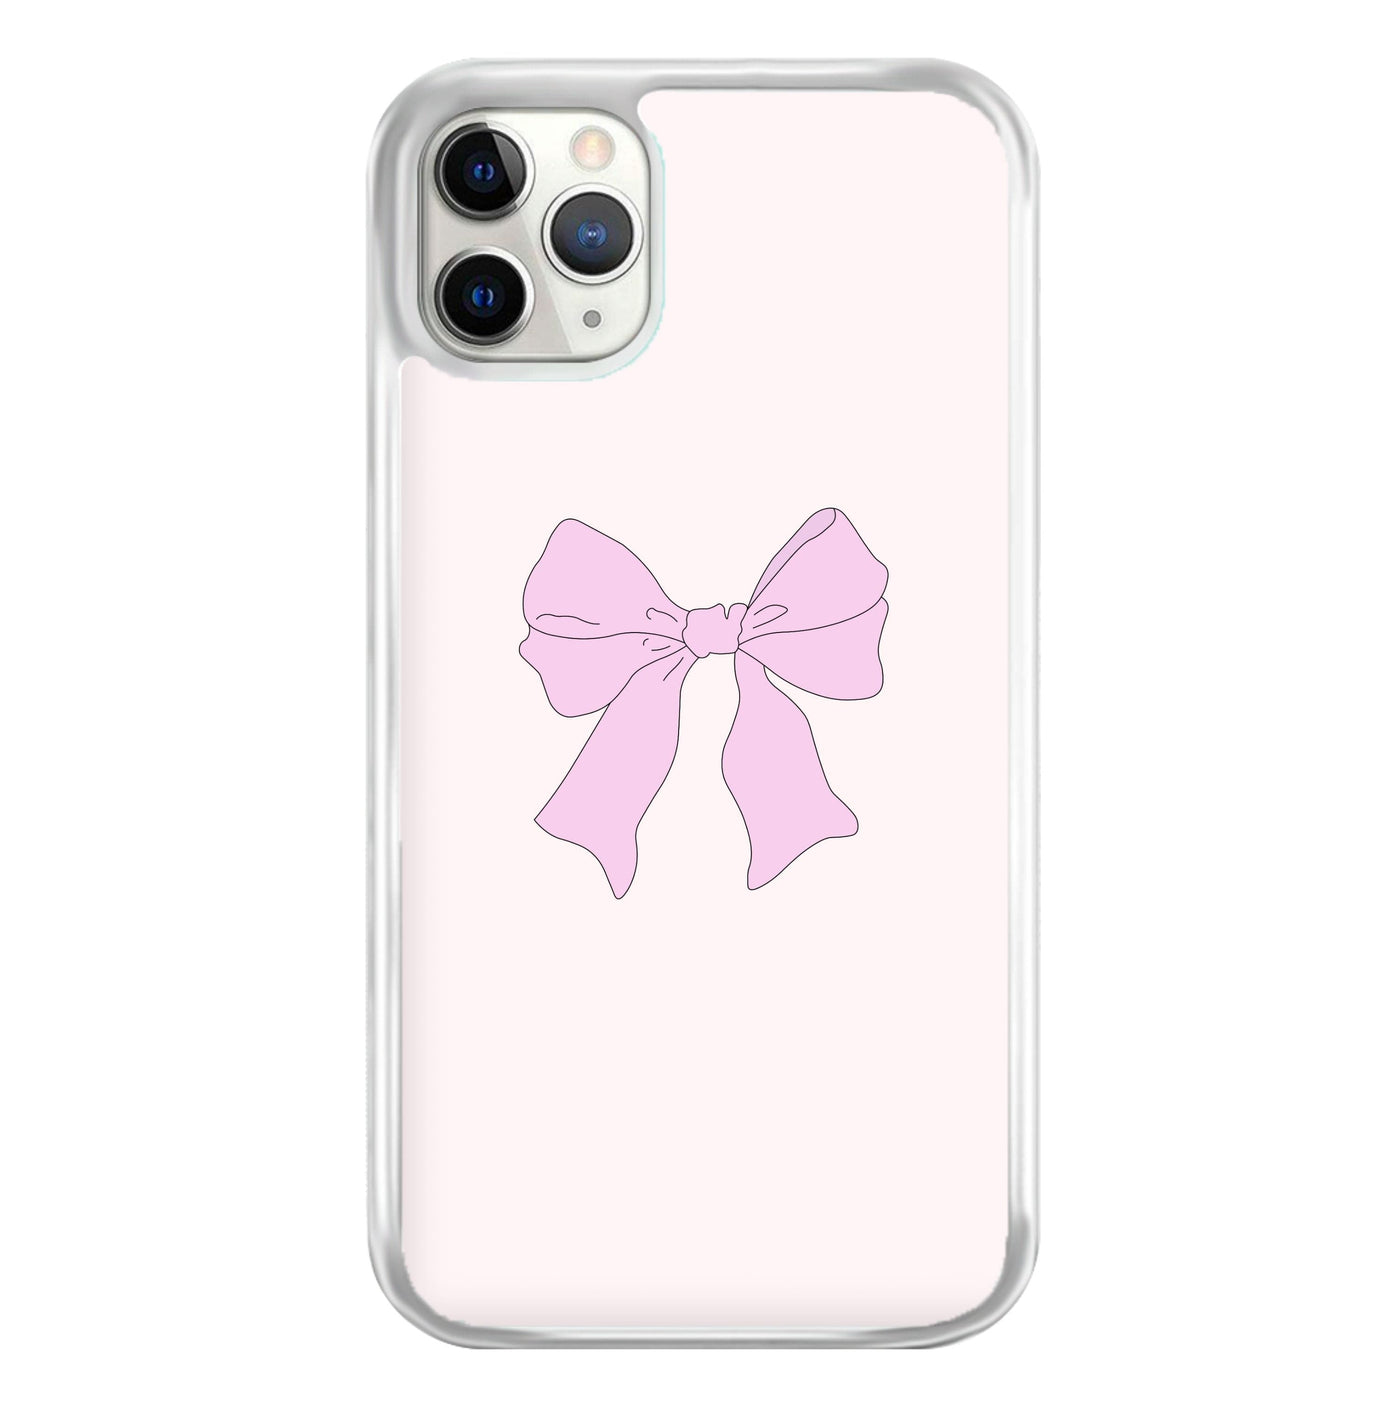 Bow - Clean Girl Aesthetic Phone Case